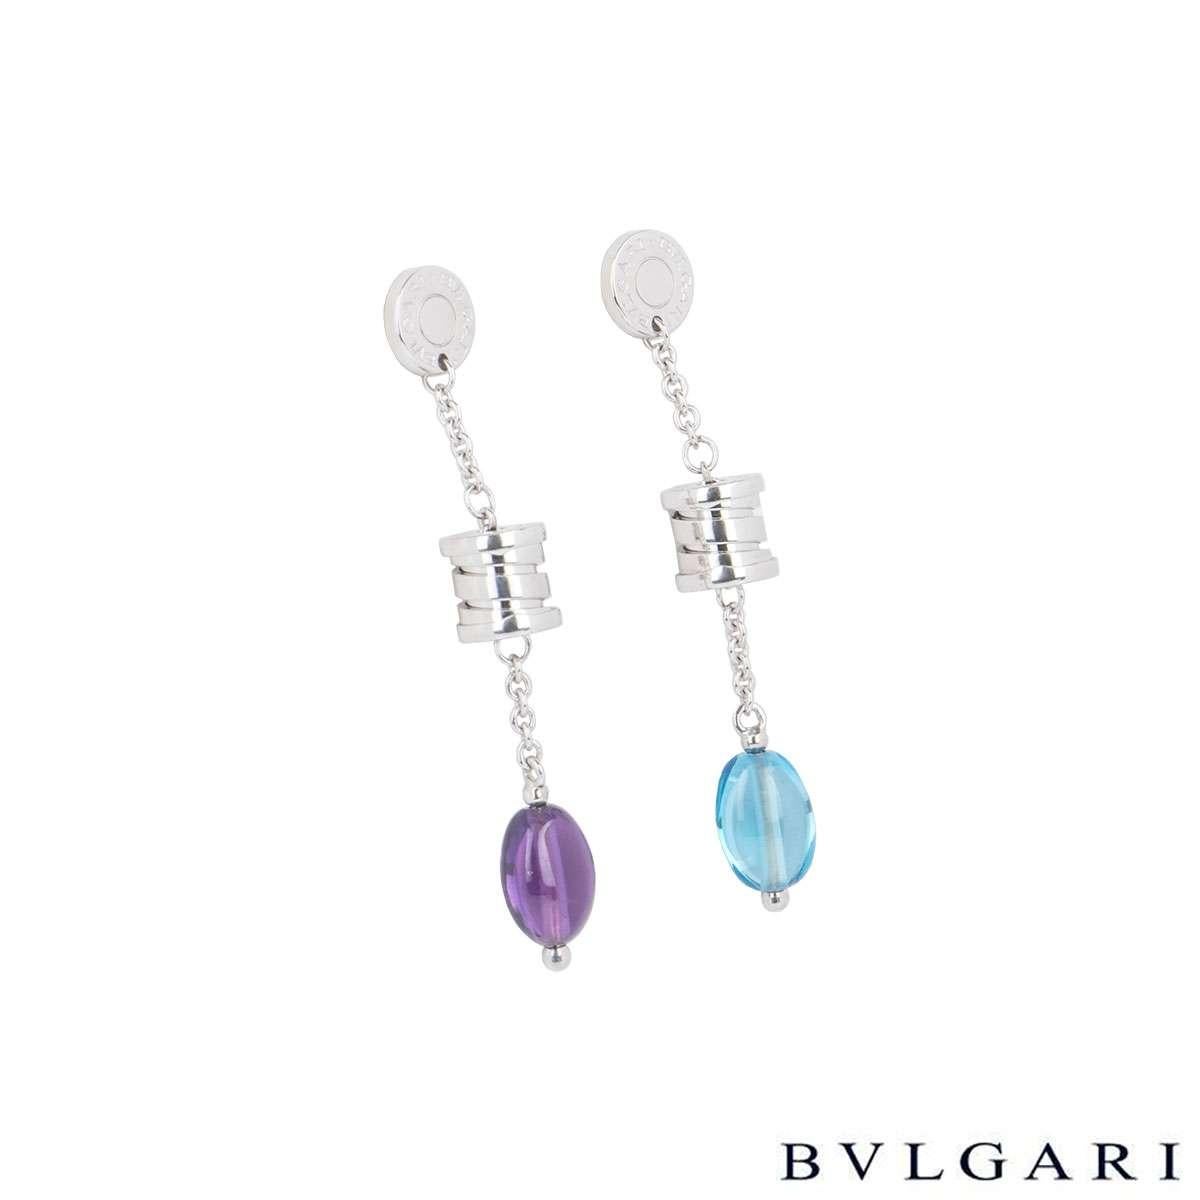 Antique Cushion Cut Bulgari Amethyst and Topaz B.Zero1 Earrings and Necklace Jewellery Suite